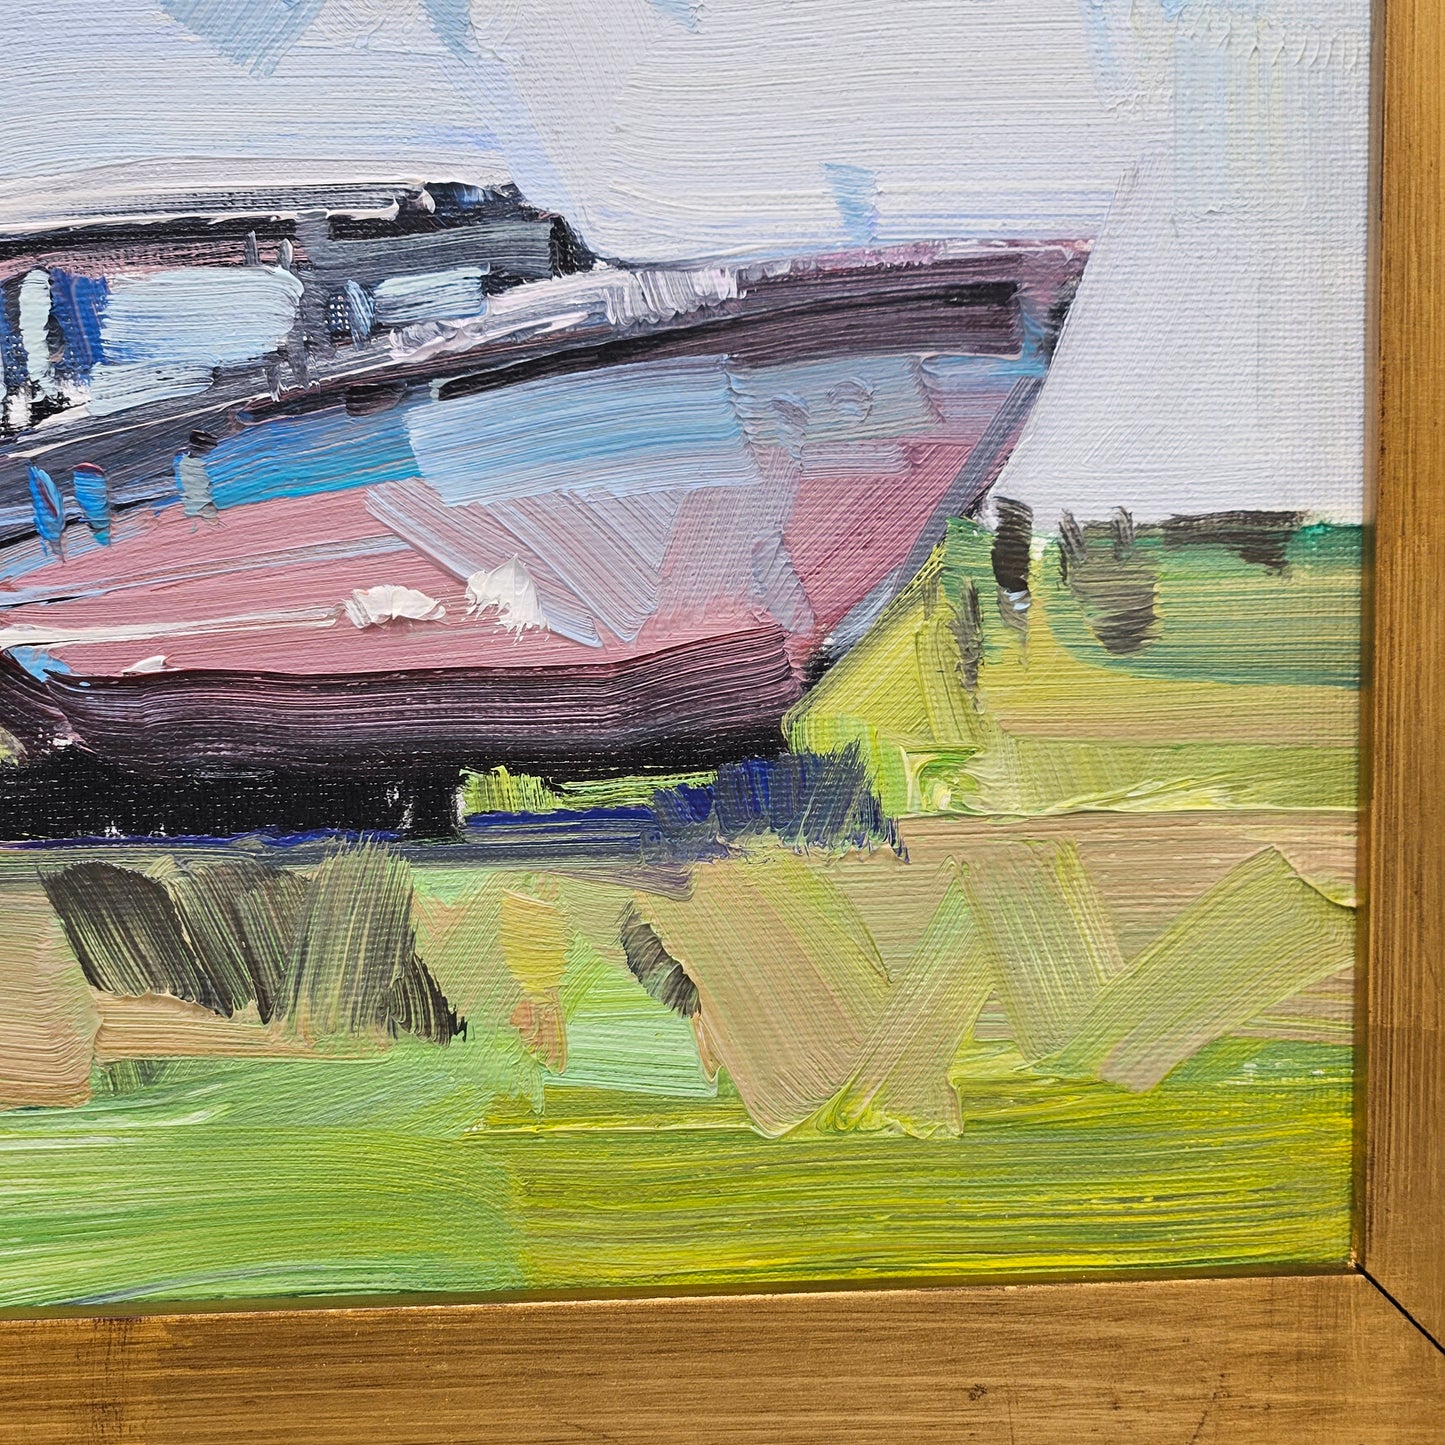 Jose Trujillo Oil on Canvas Painting of Boat